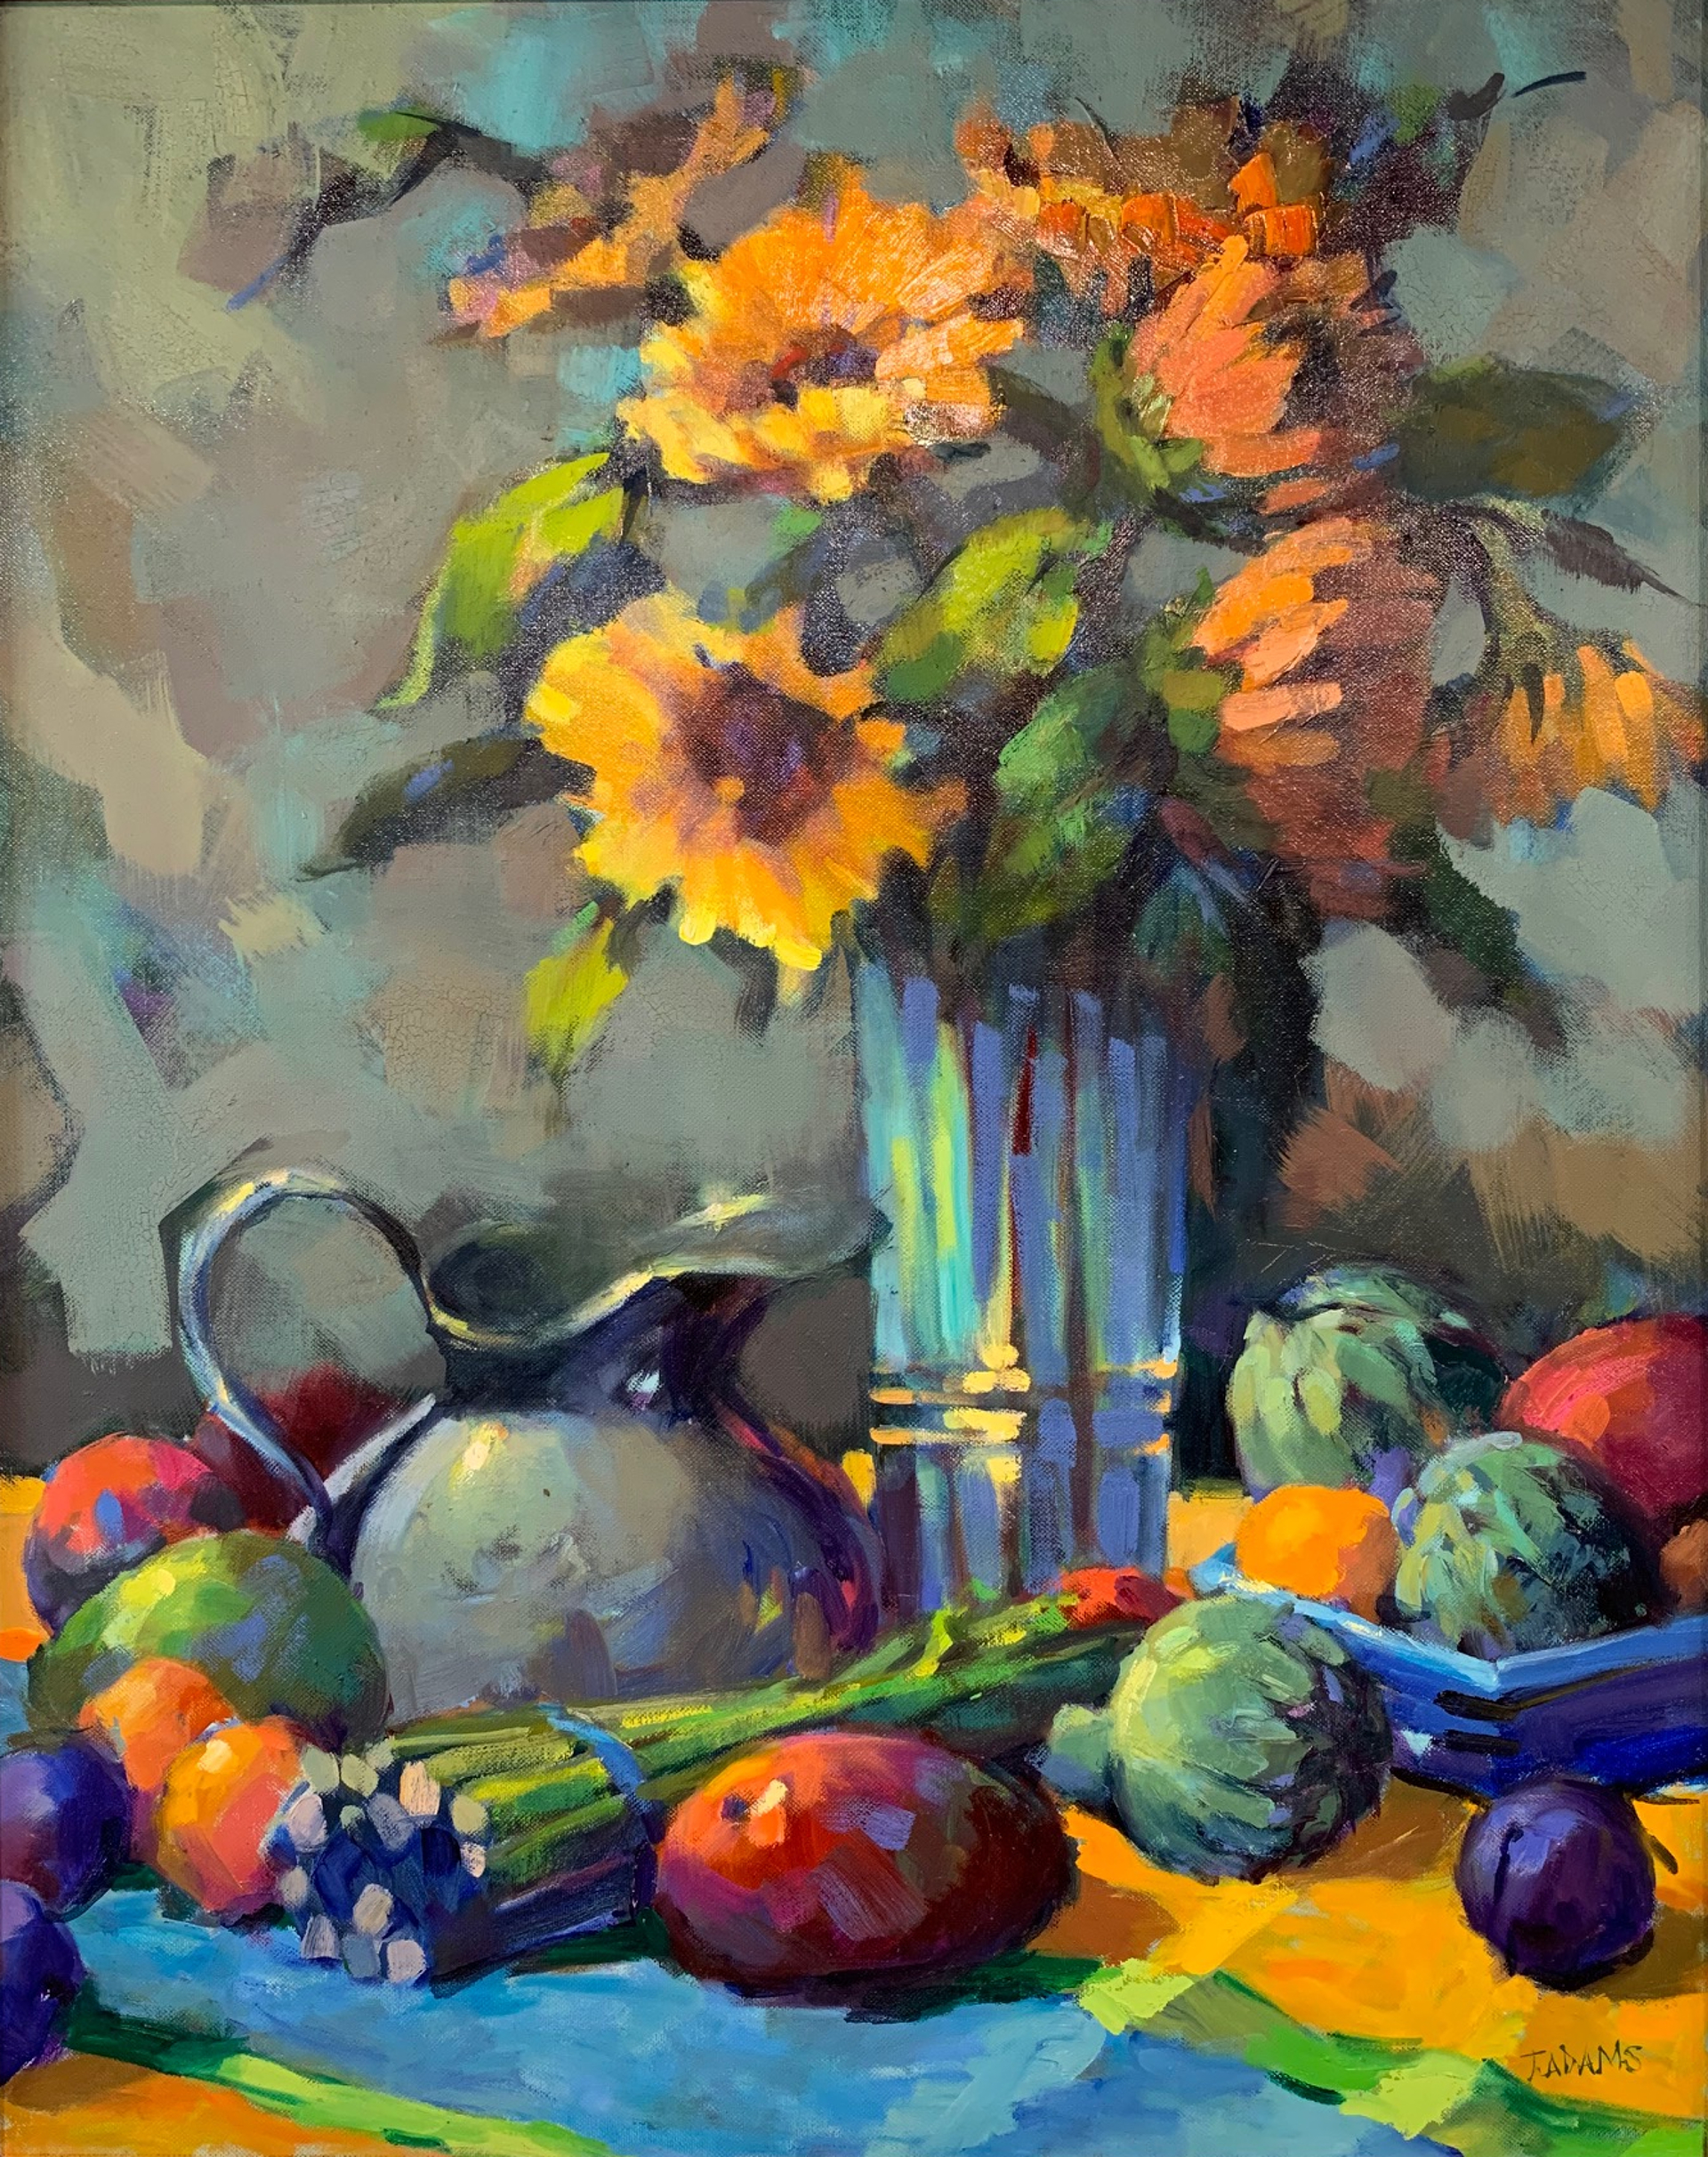 Fruits and Vegetables by Trisha Adams